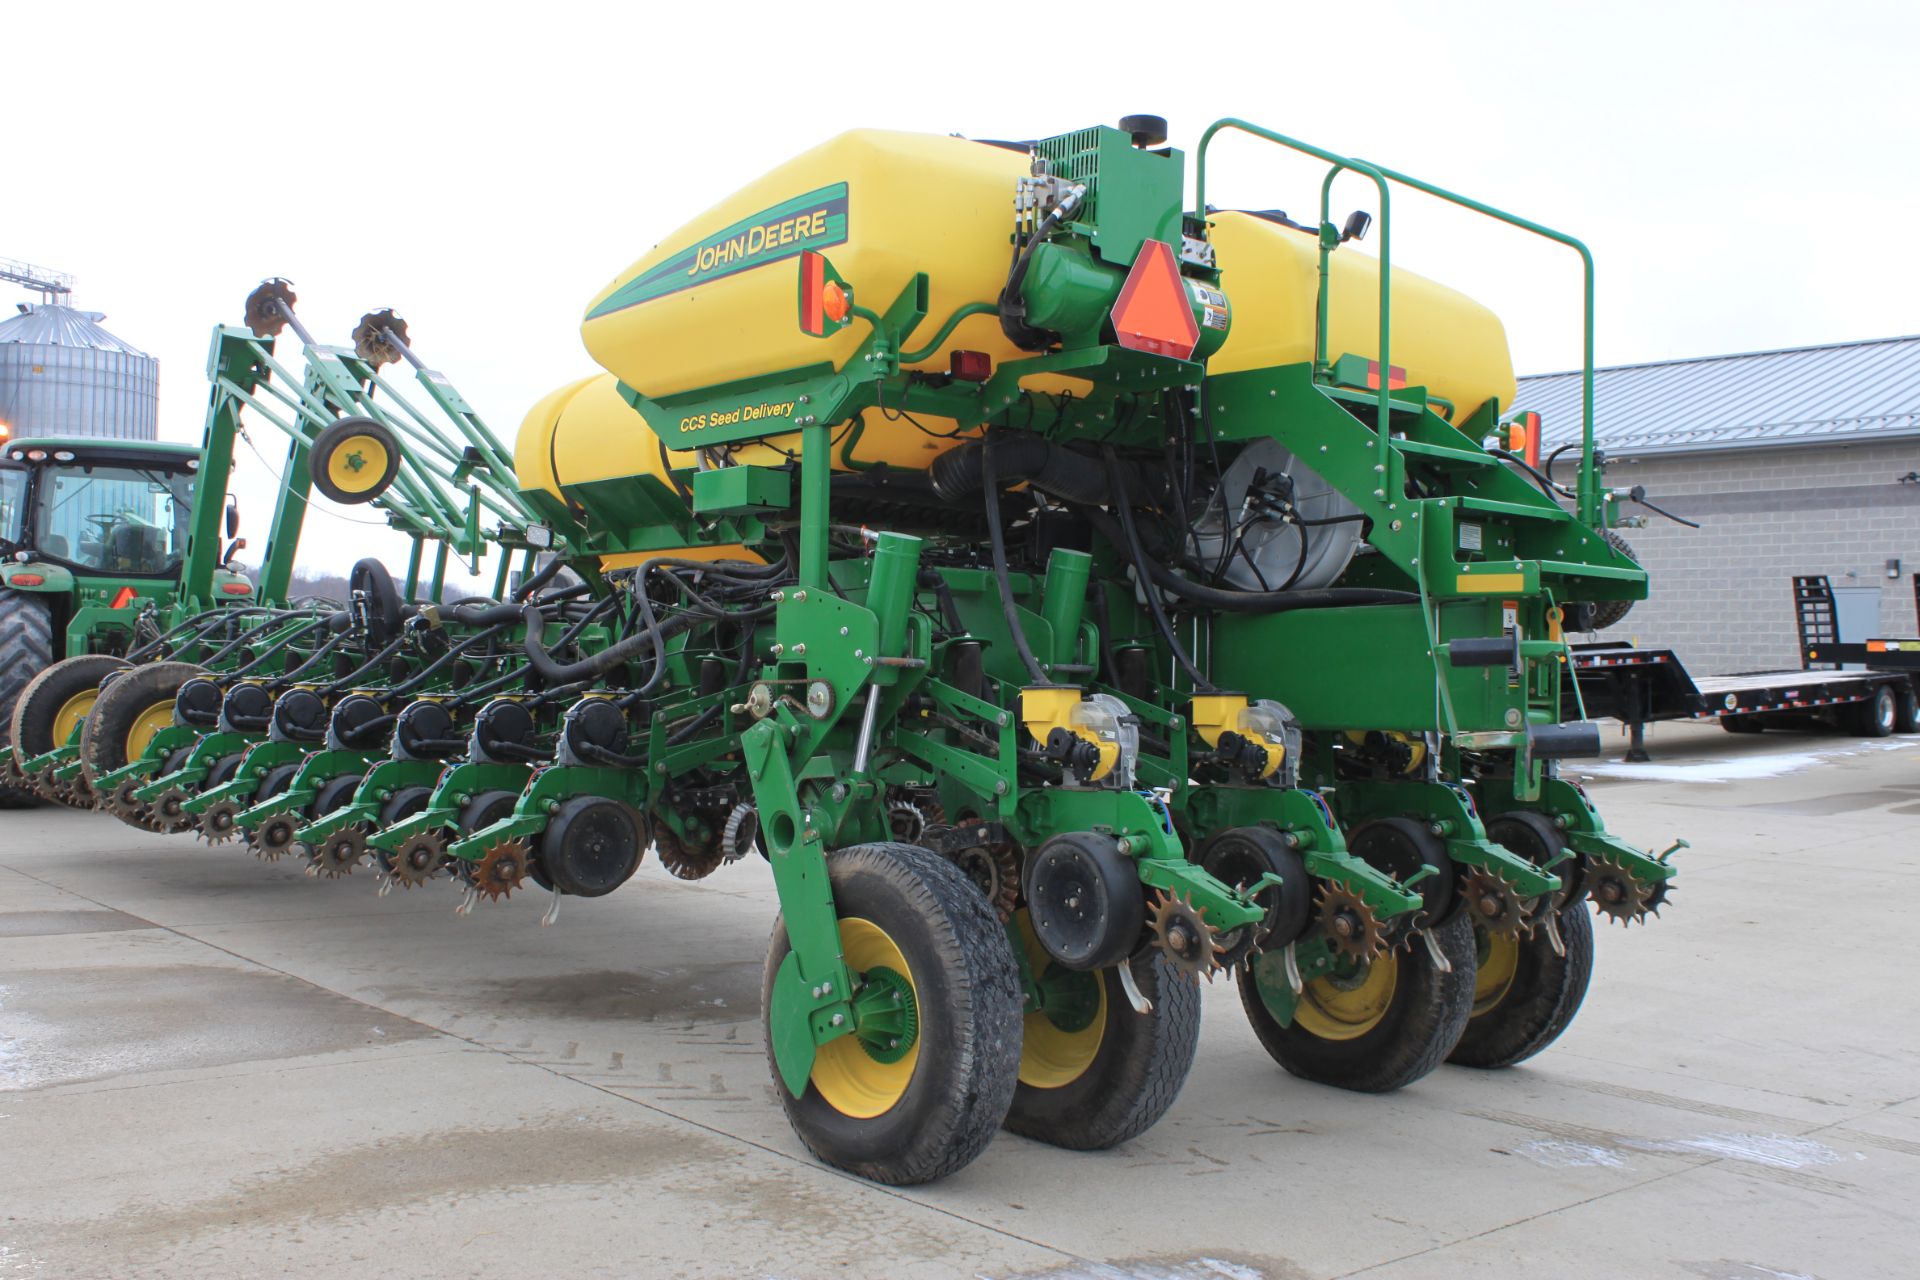 Planter 1770 (2013) - A01770CPDM755335 - 24 row 30"row spacing, active pneunamatic down force - Image 3 of 6